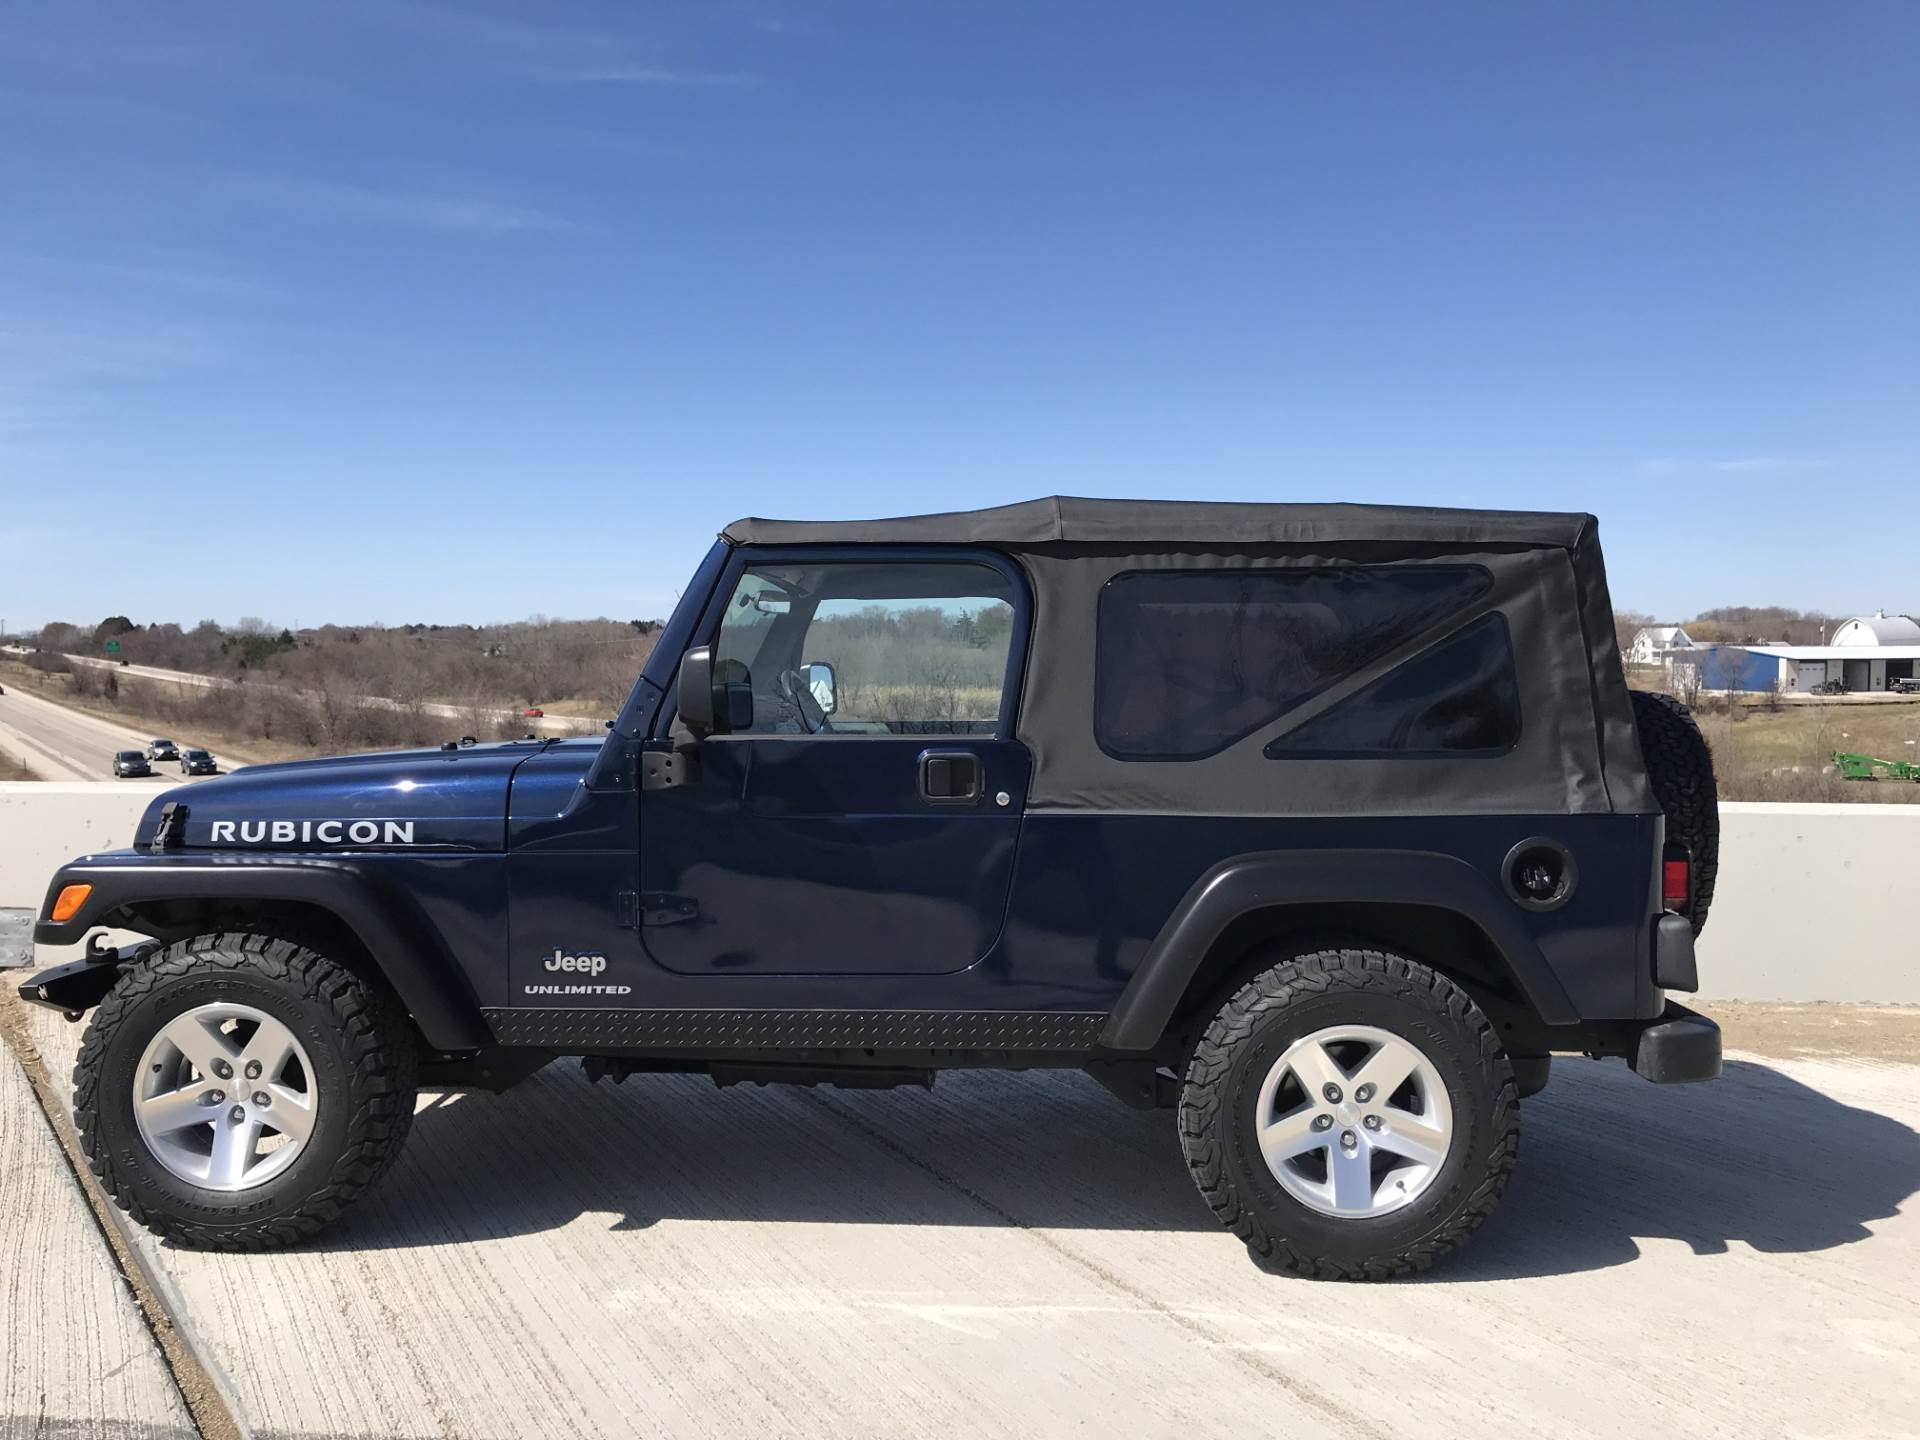 2006 Jeep Wrangler Unlimited Rubicon 2dr SUV 4WD in Big Bend, Wisconsin - Photo 121